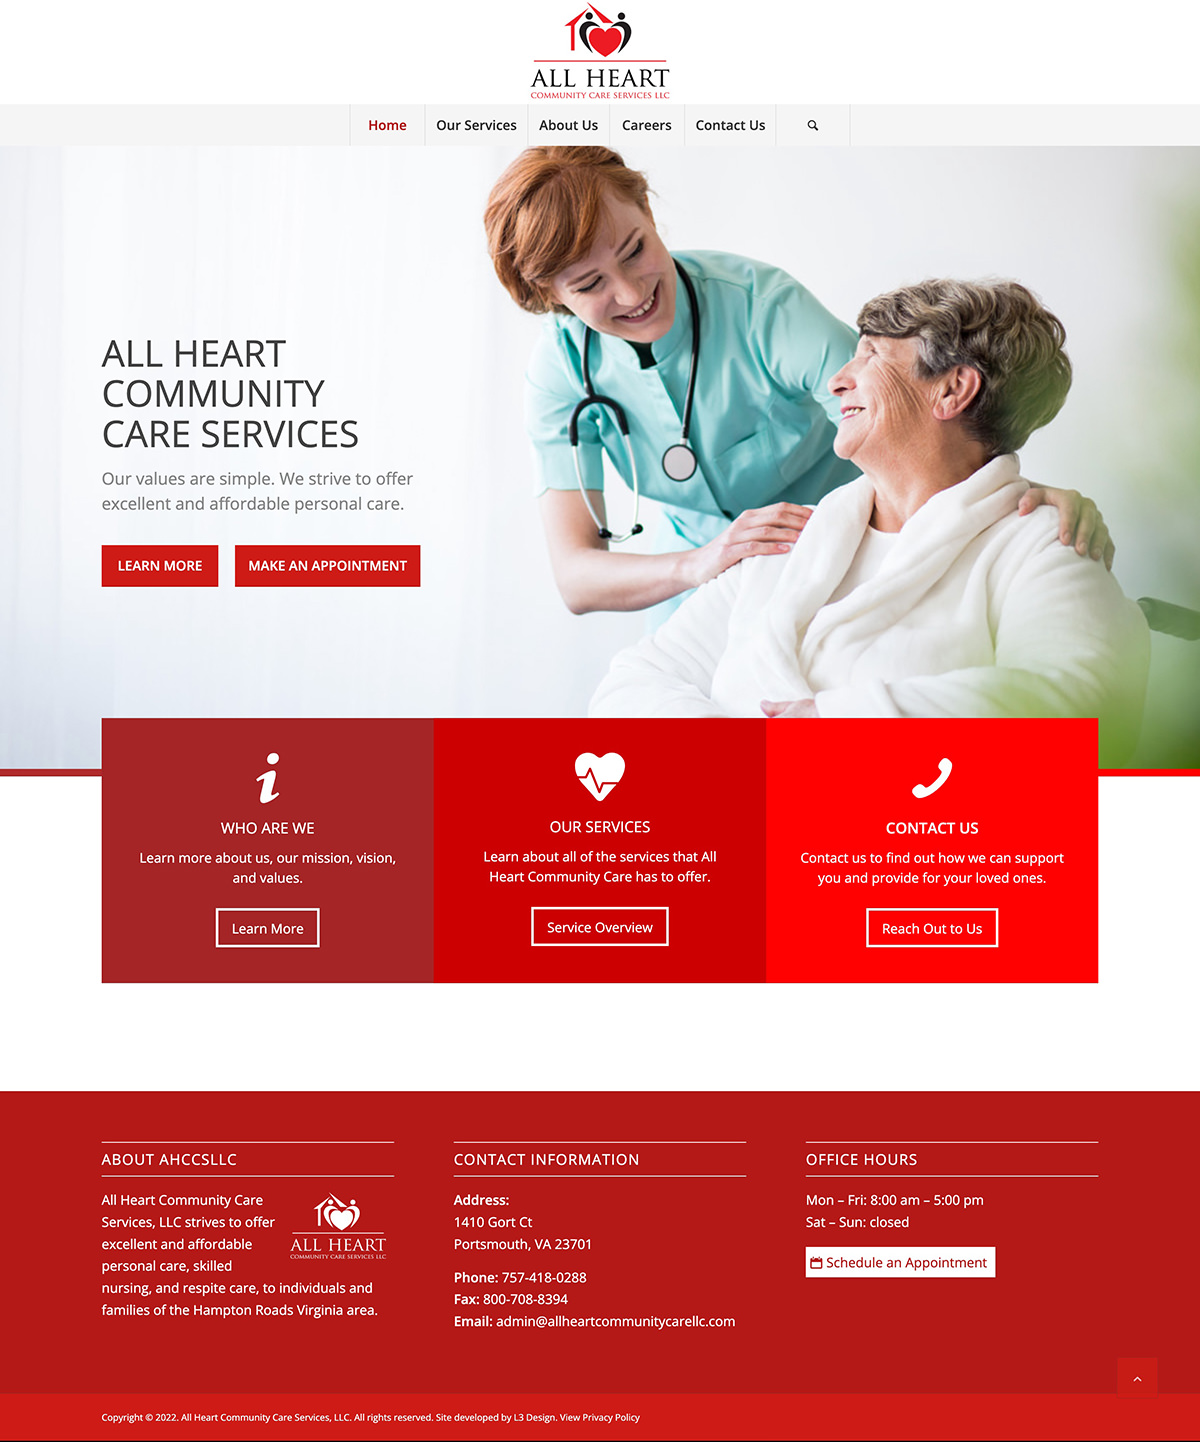 All Heart Community Care Services, LLC